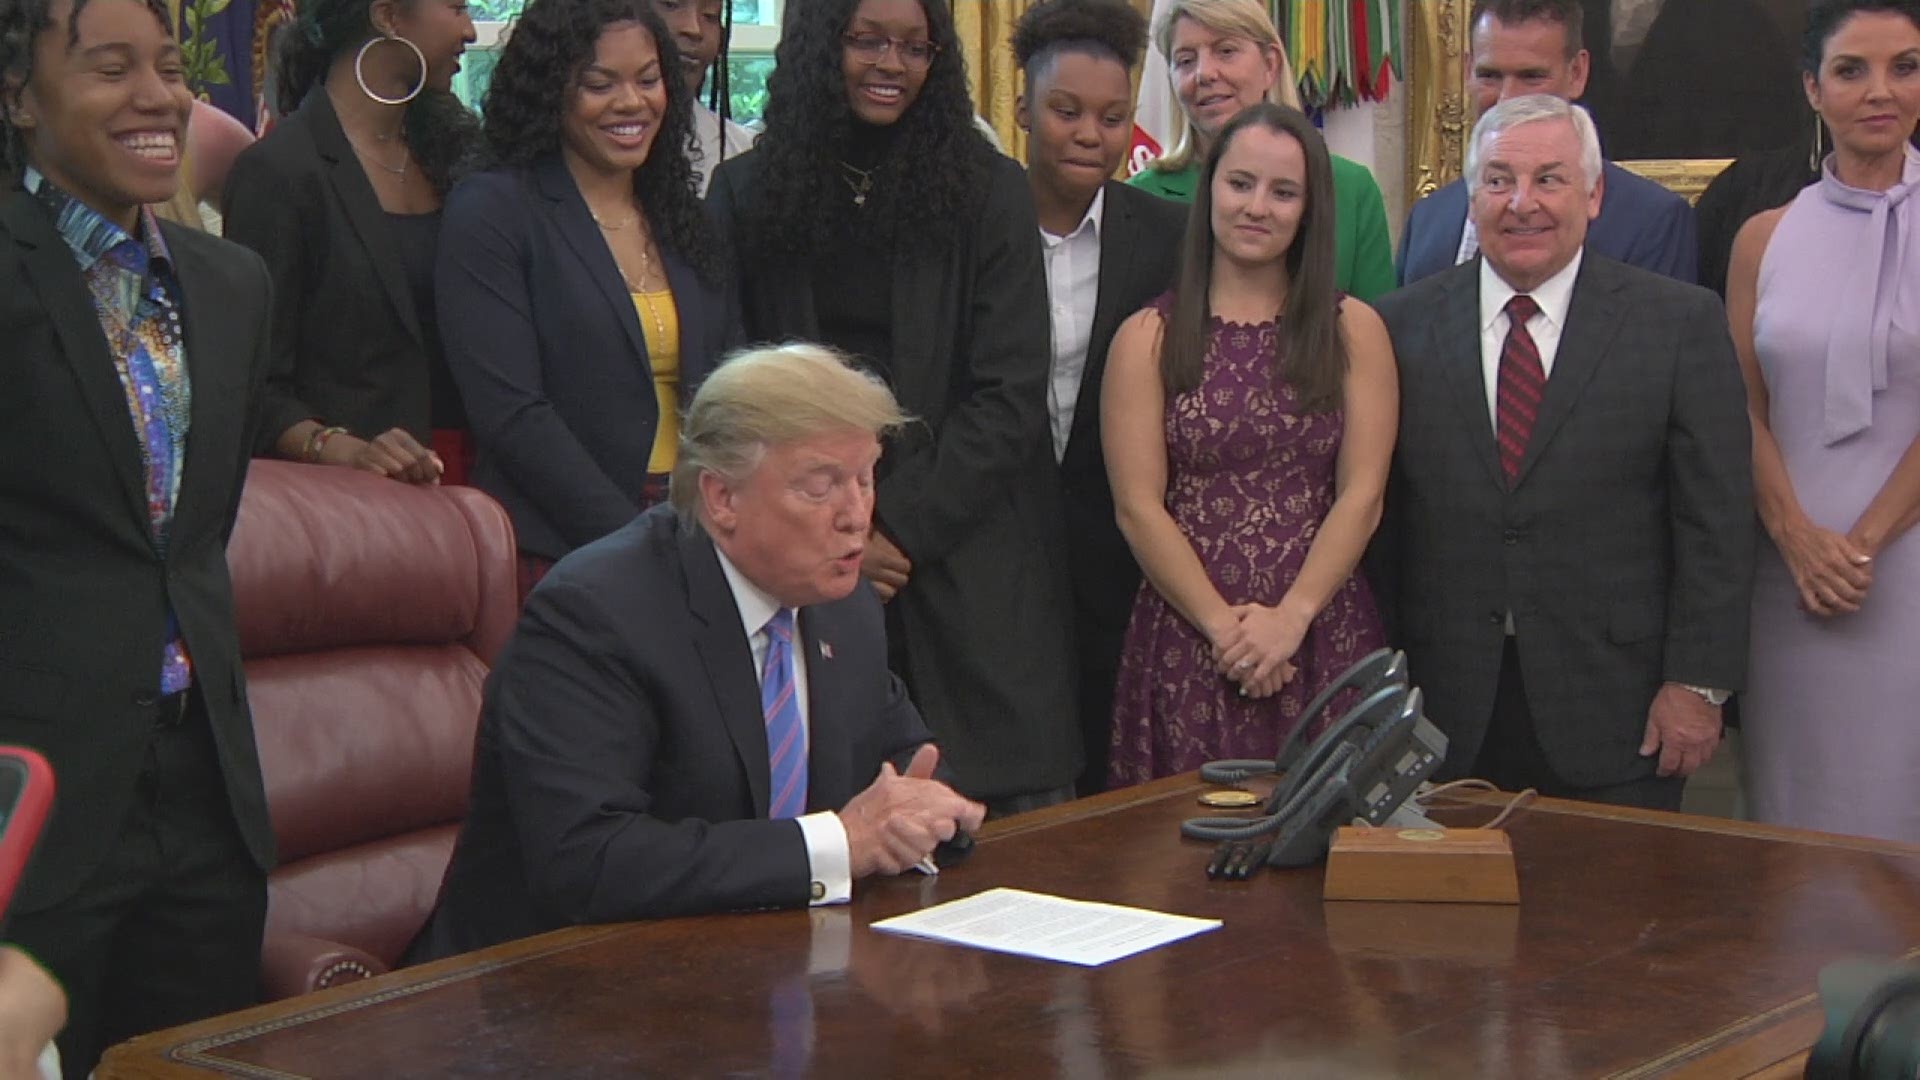 Watch President Donald Trump's full speech as he welcomed the national champion Baylor Lady Bears into the Oval Office.